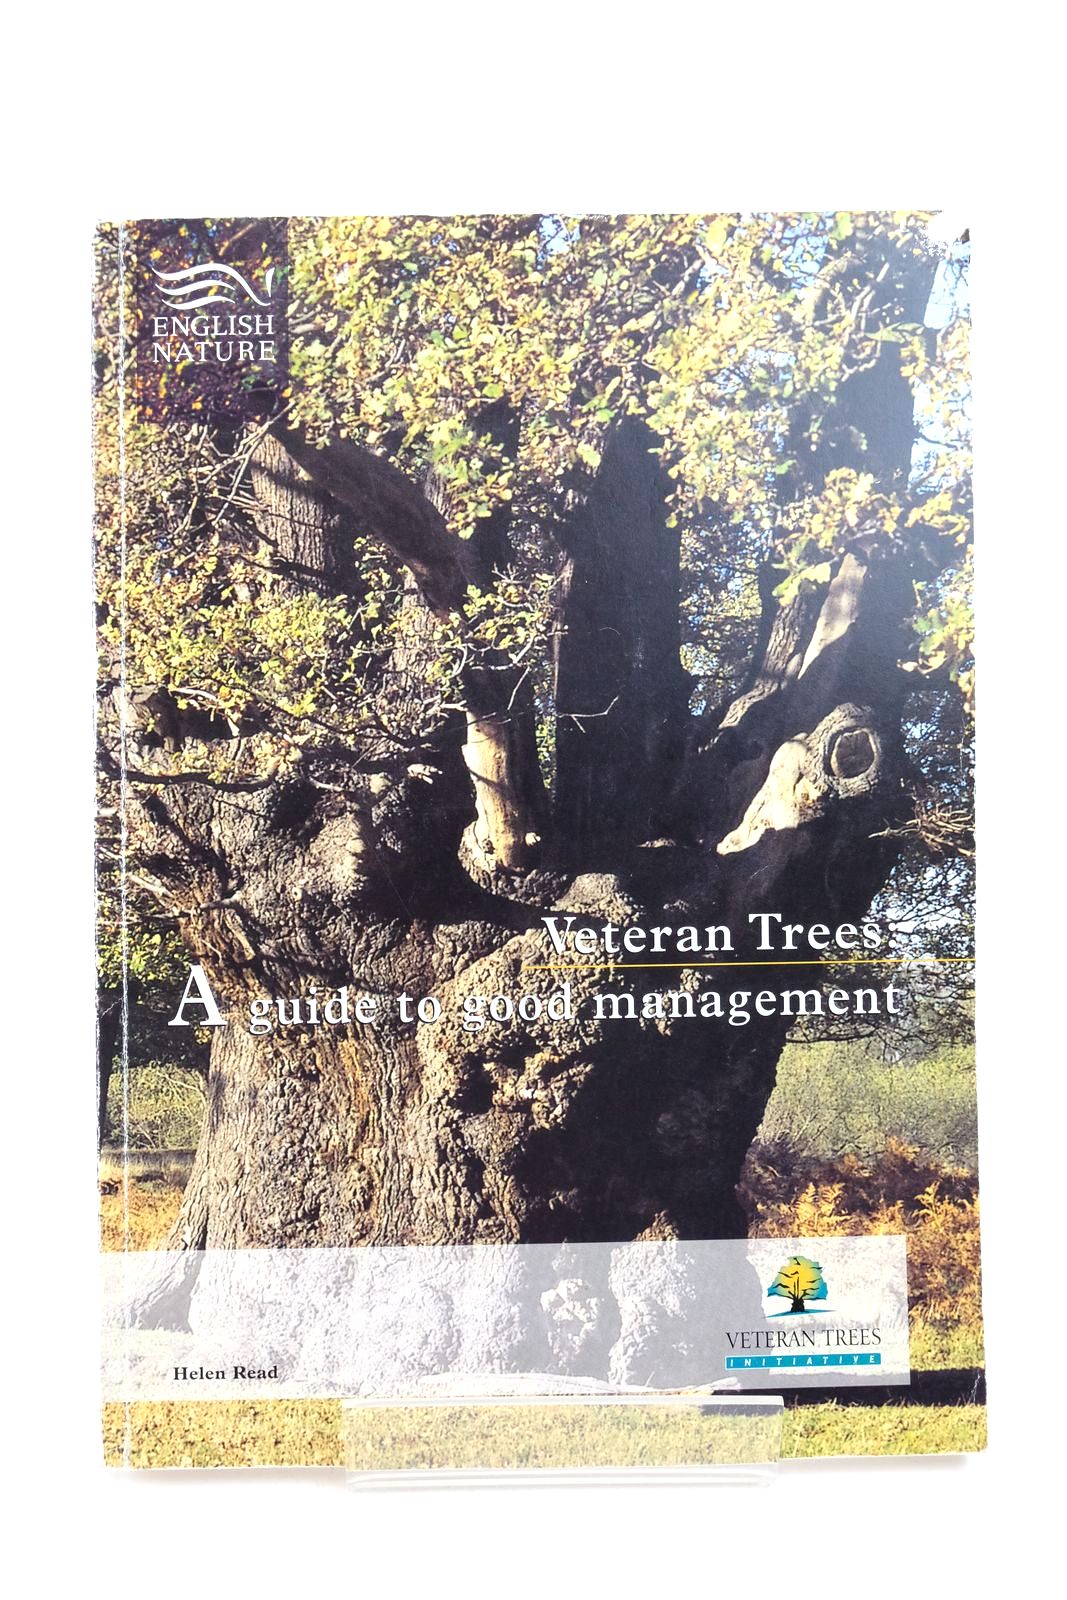 Photo of VETERAN TREES: A GUIDE TO GOOD MANAGEMENT written by Read, Helen et al, published by English Nature (STOCK CODE: 2139521)  for sale by Stella & Rose's Books